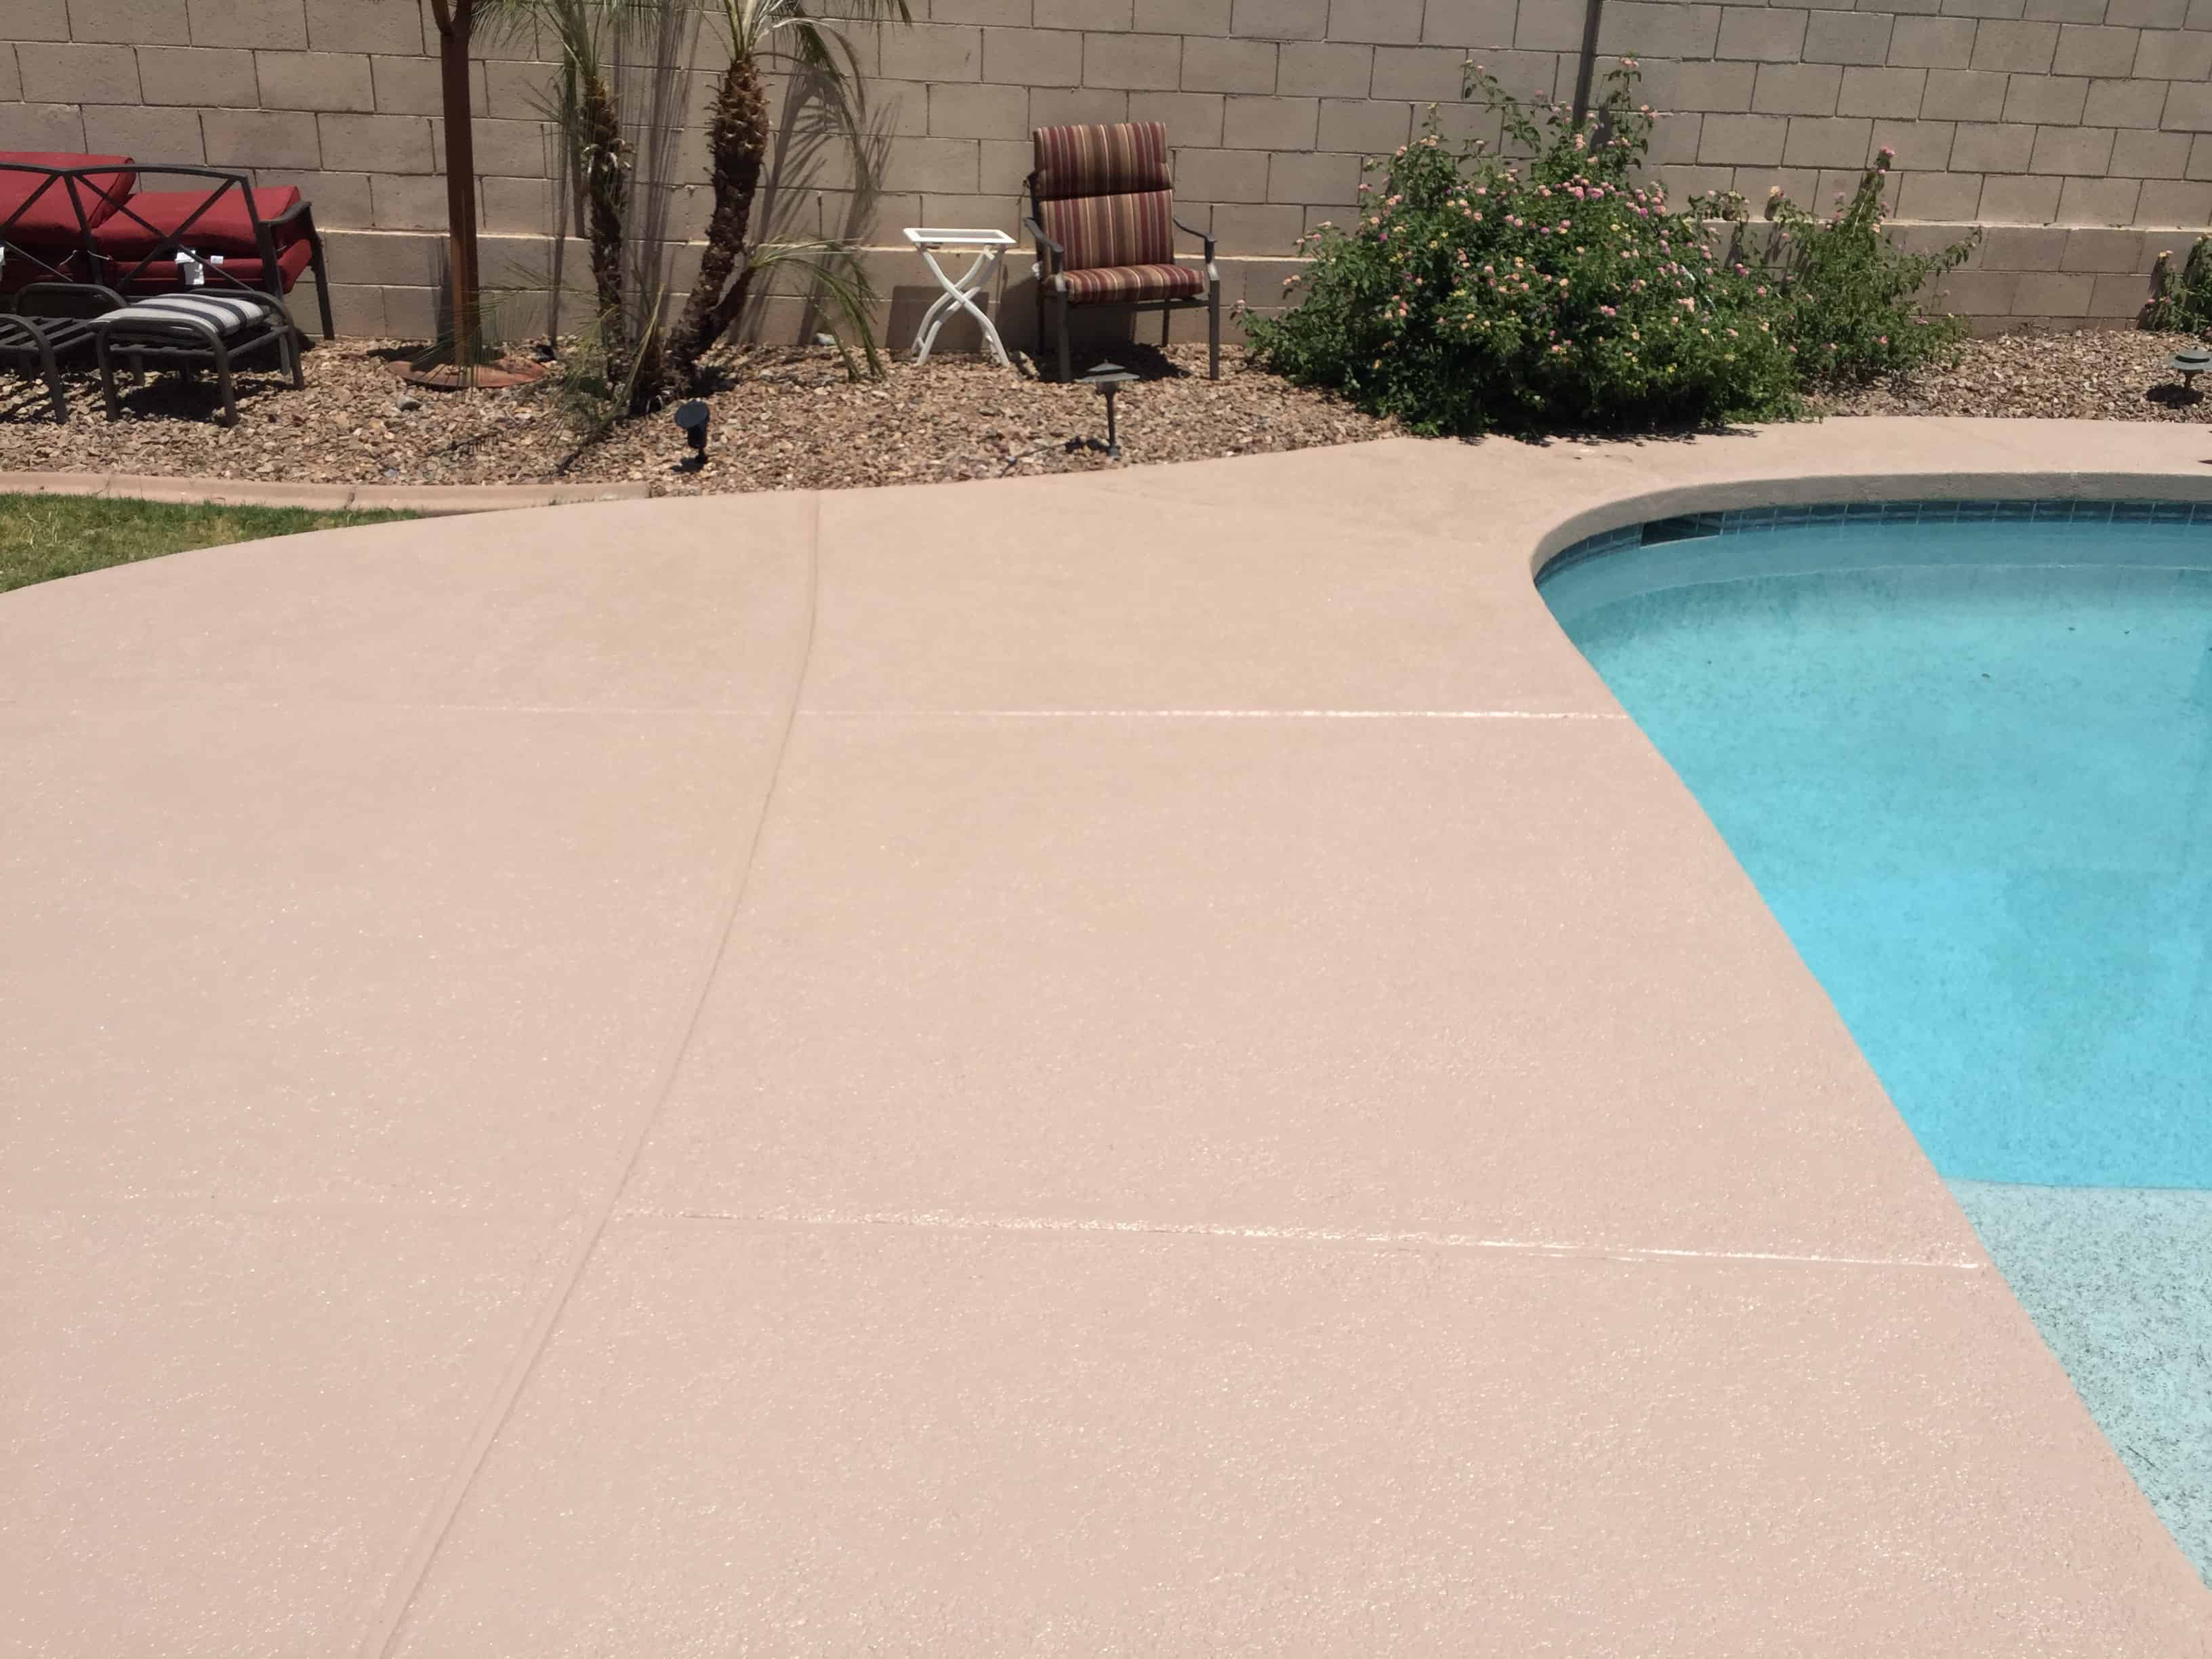 Kool Deck Repair Carefree Stone 602 867 0867 with size 3264 X 2448